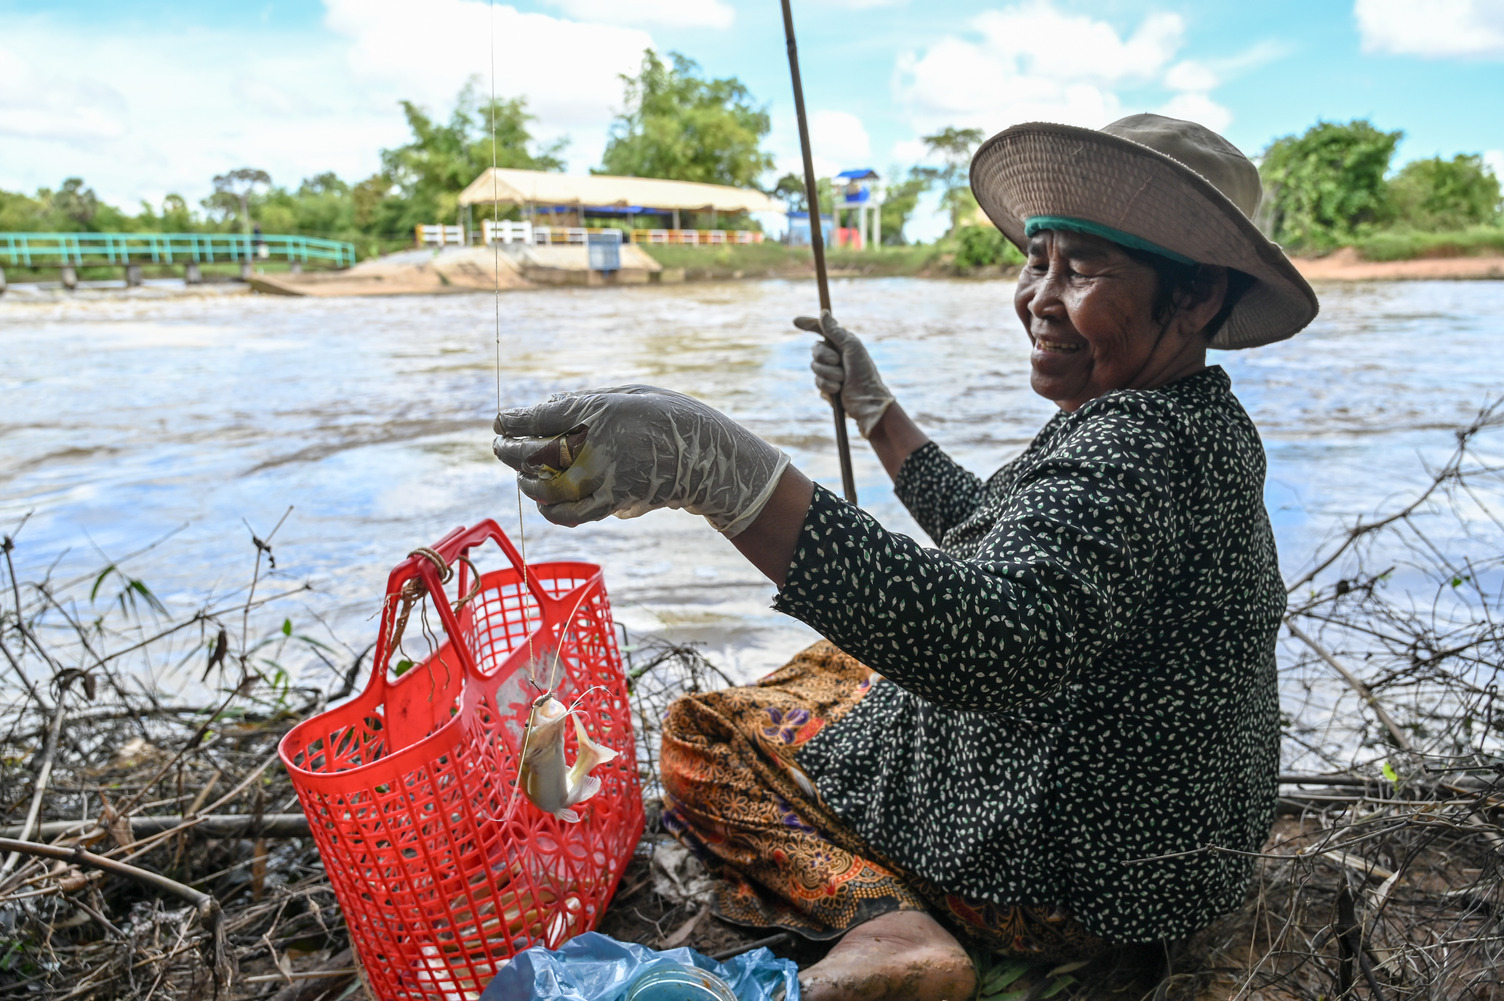 Wild-caught fish, especially small-bodied species, are a vital food source for rural Cambodian communities, providing essential nutrients and protein for families, particularly pregnant women and children.